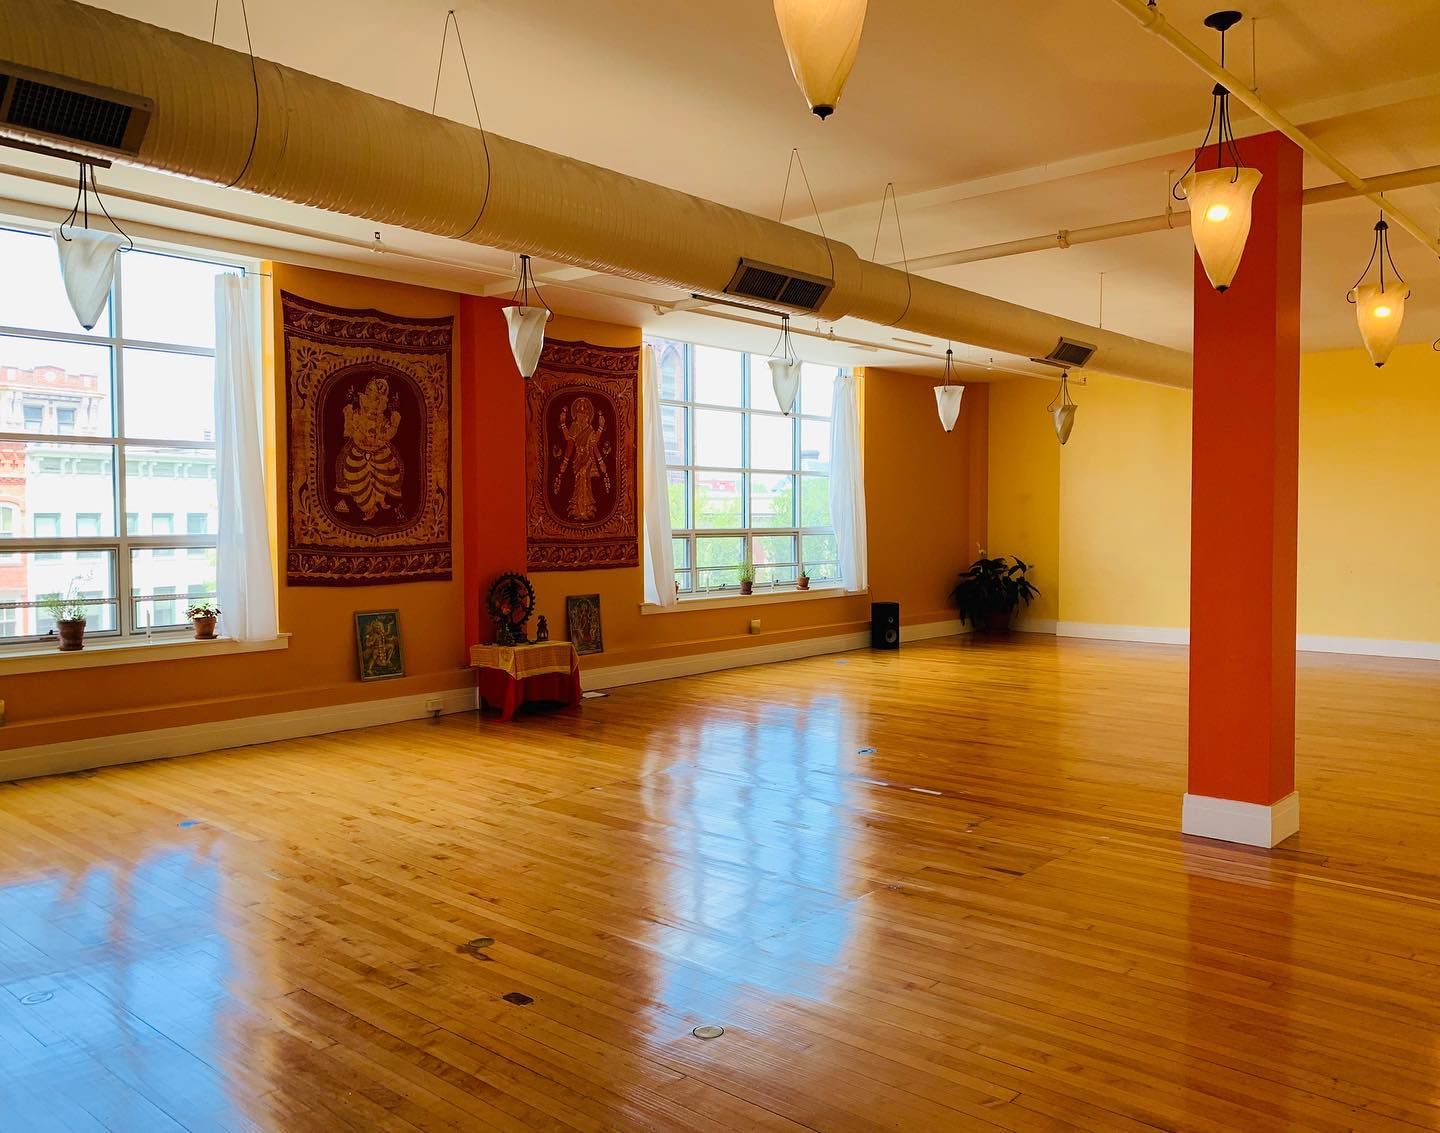 Yoga Sanctuary is your go-to place for yoga classes in Thornes Marketplace in Northampton MA!